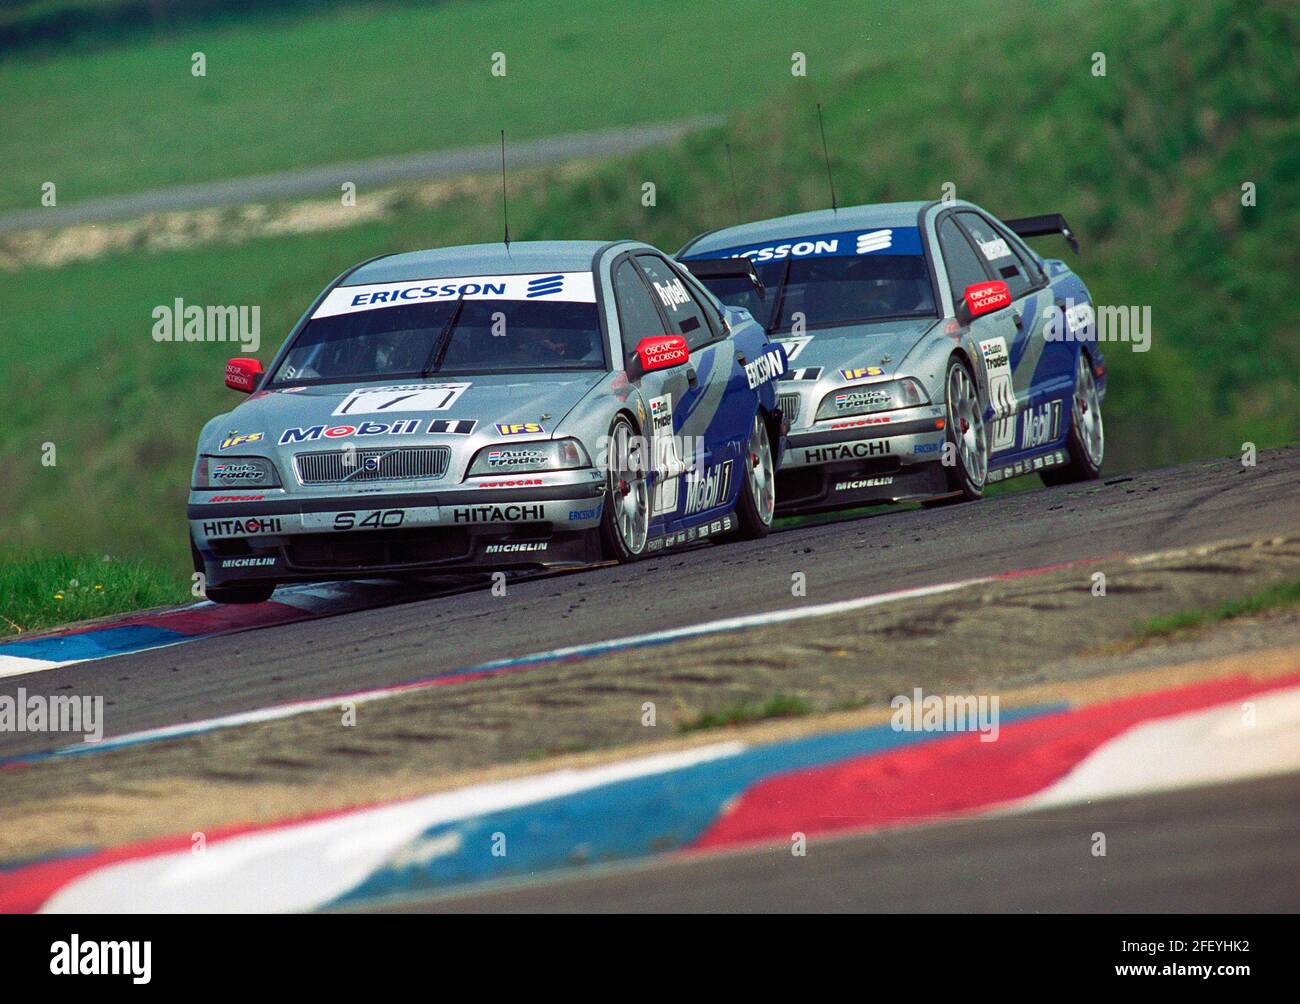 Rickard Rydell leads Vincent Radermecker as they go into the Club complex at Thruxton Racing Circuit in the 1999 British Touring Car Championship. Stock Photo